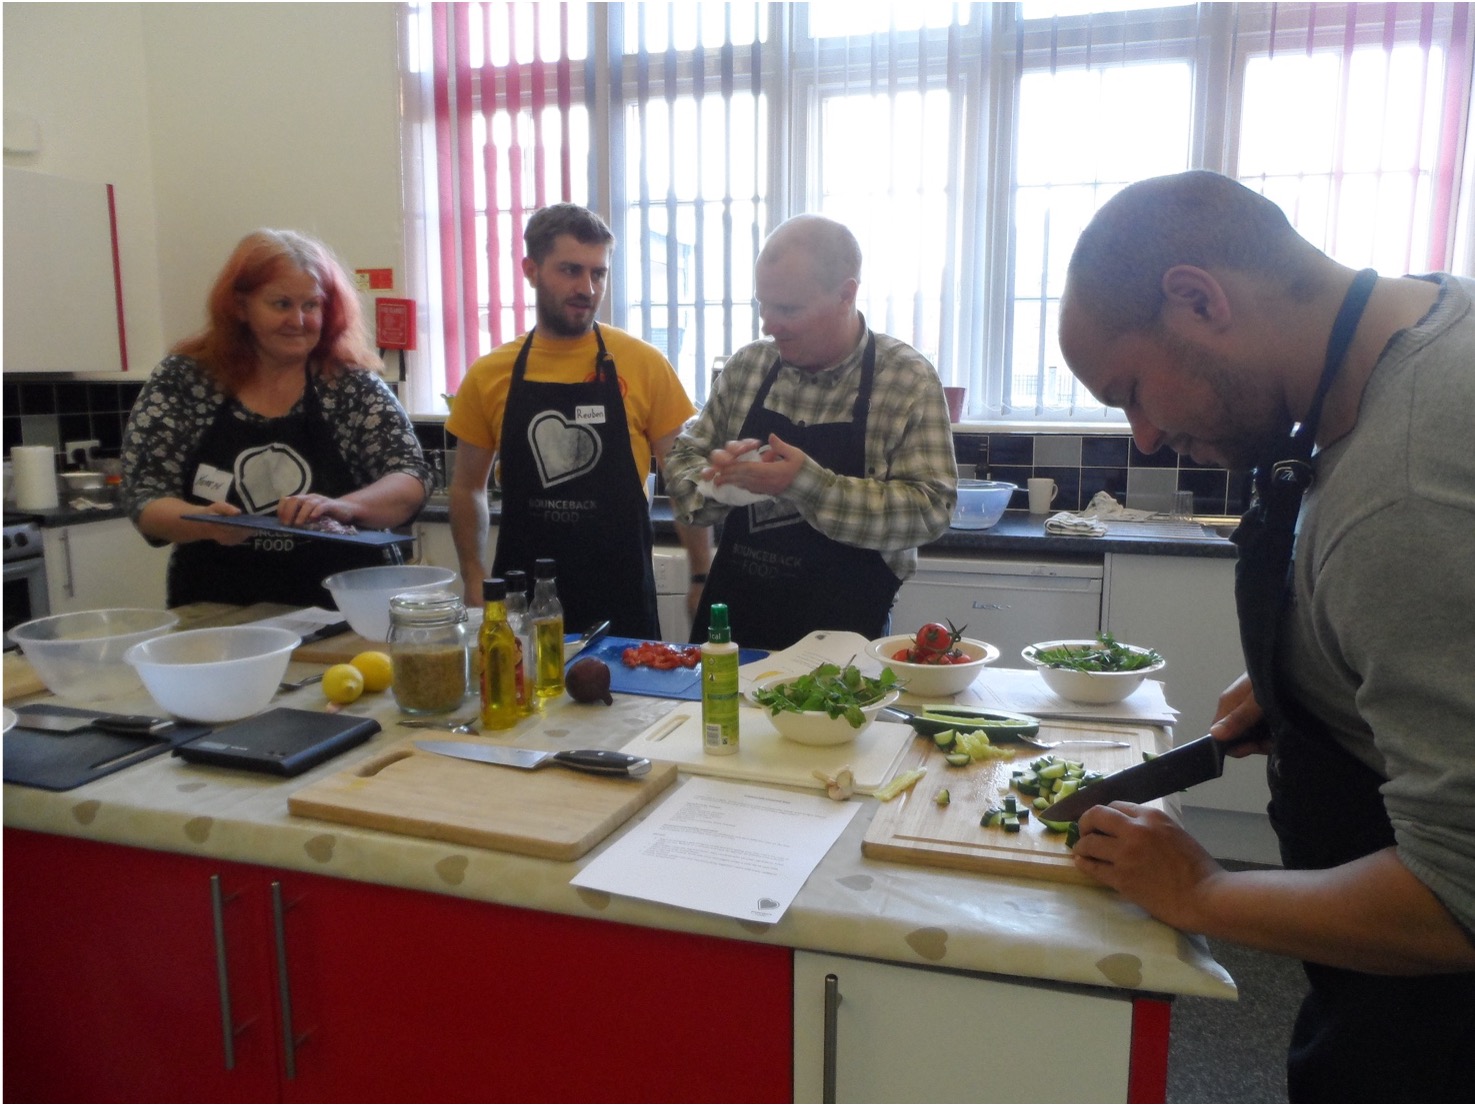 A Community Cookery School workshop is taking place around a prep table in the centre of the kitchen